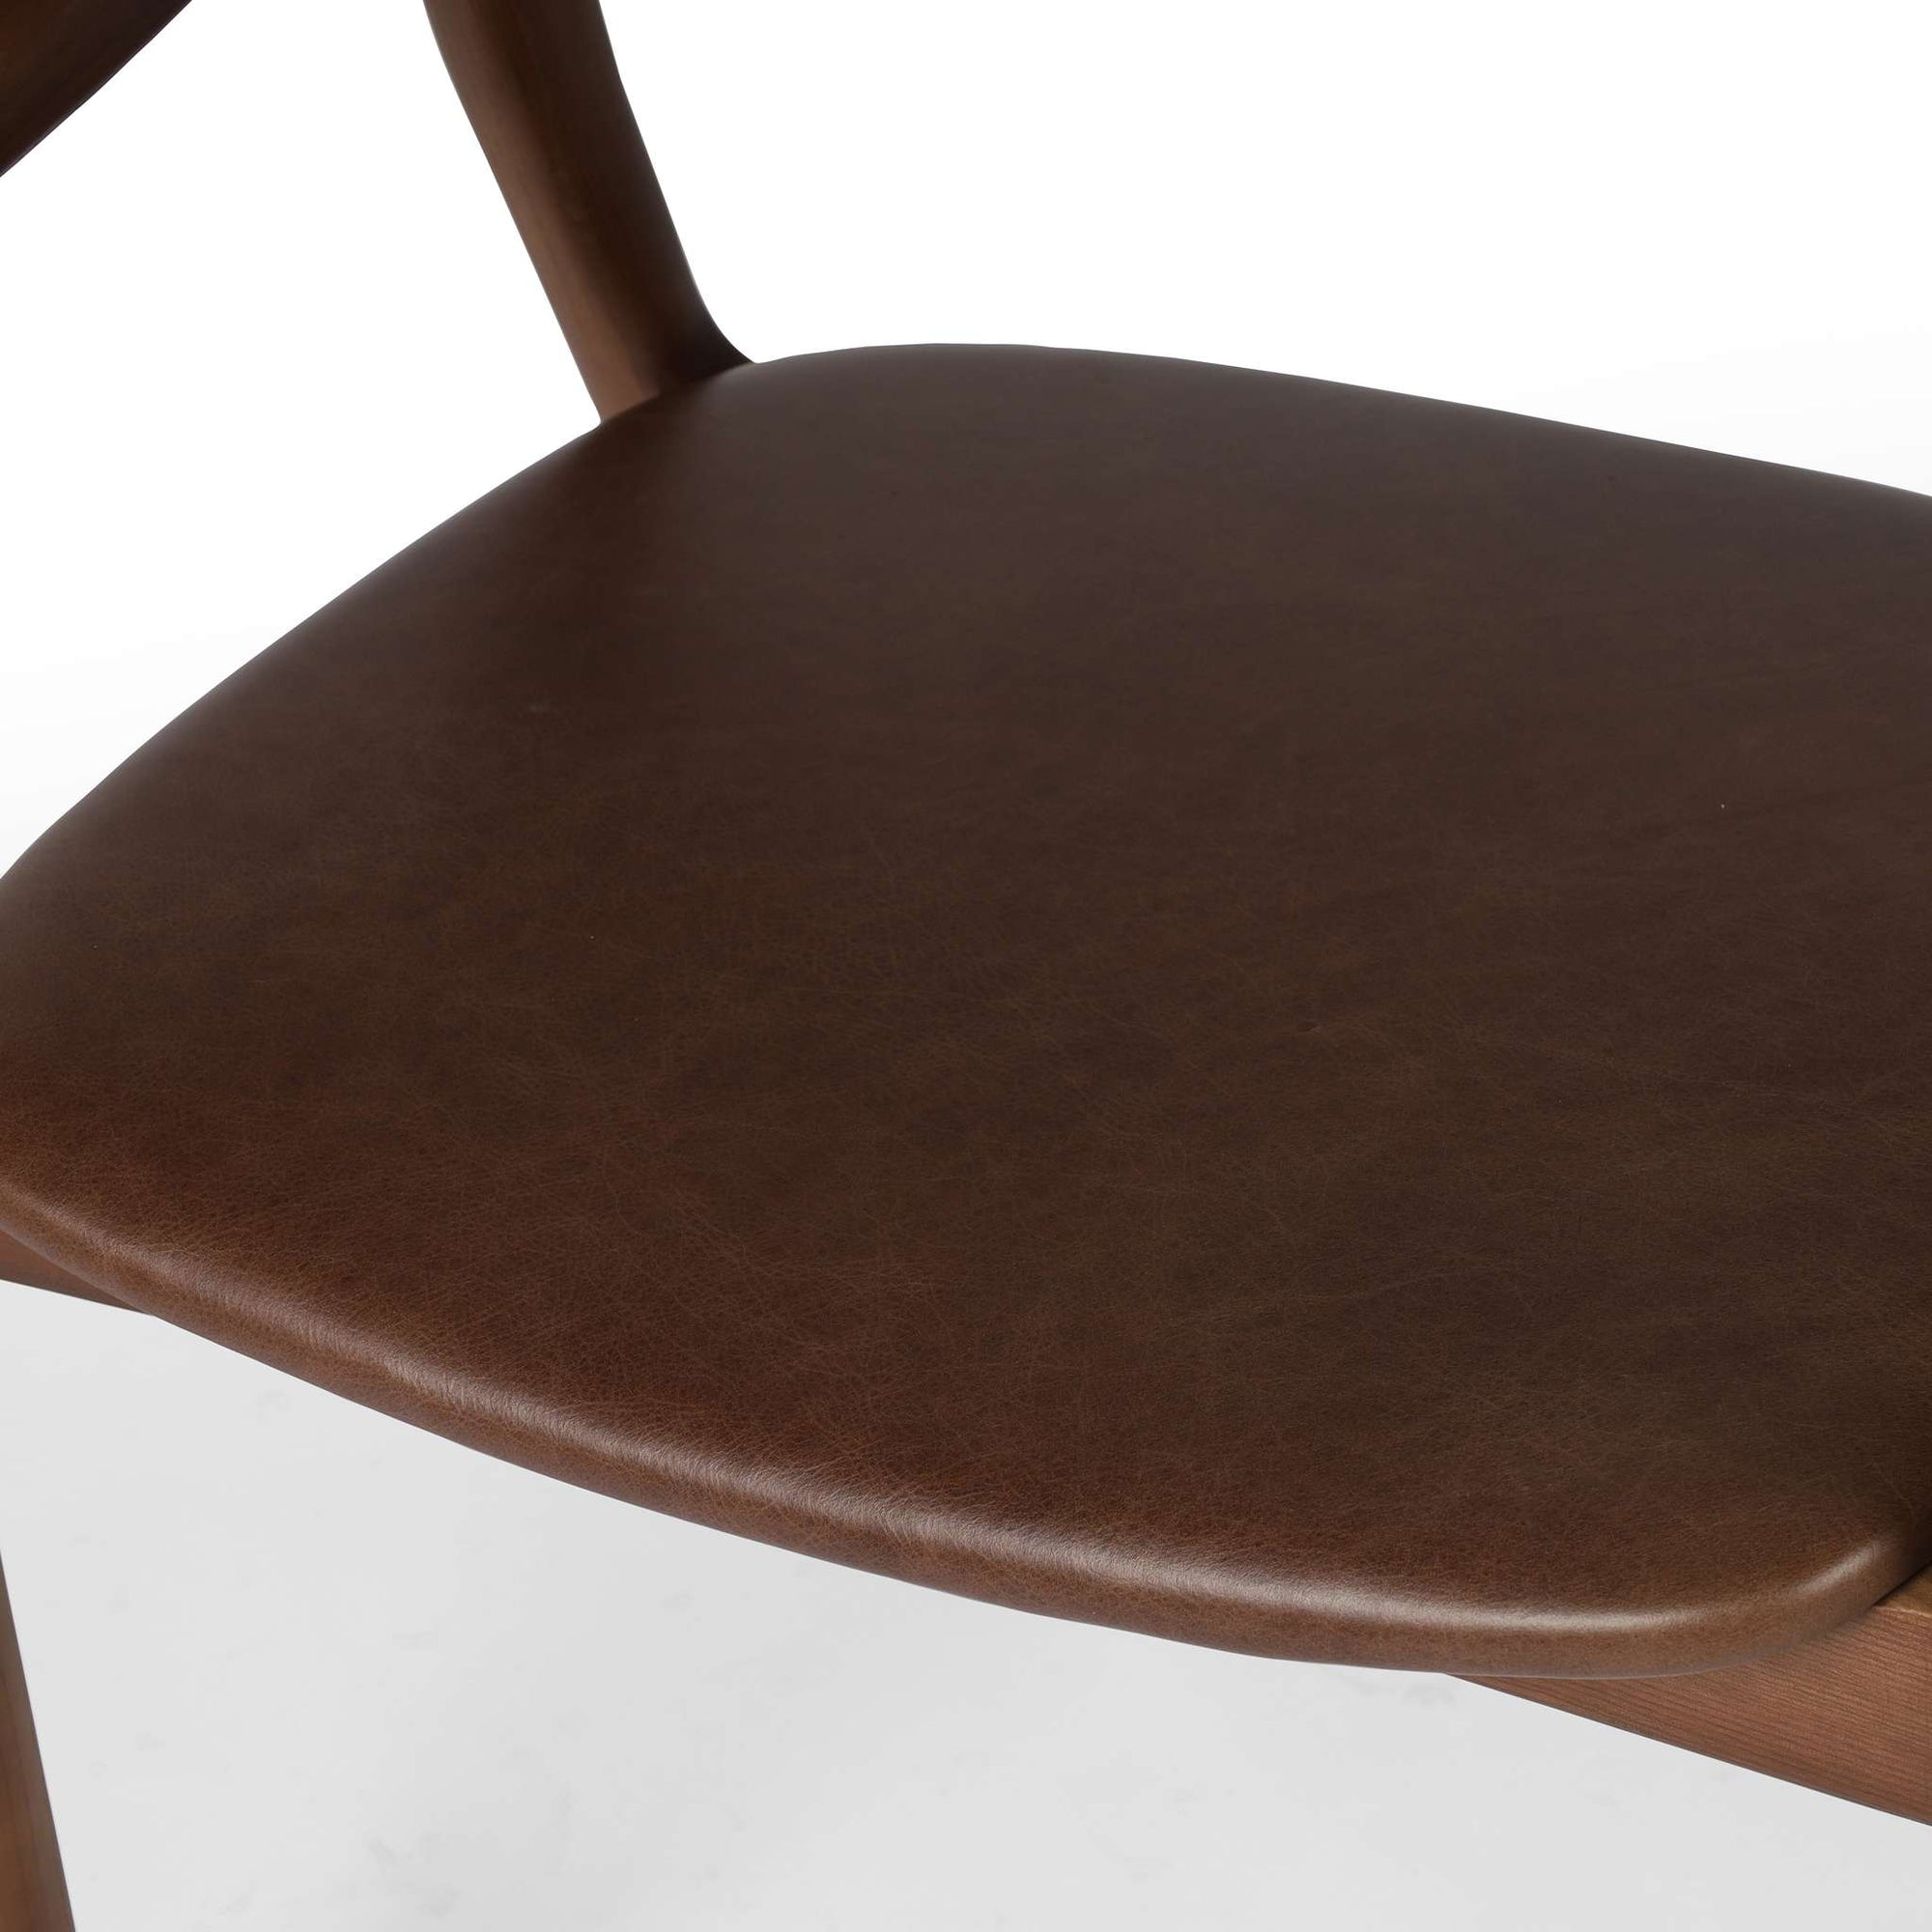 Amare Dining Armchair